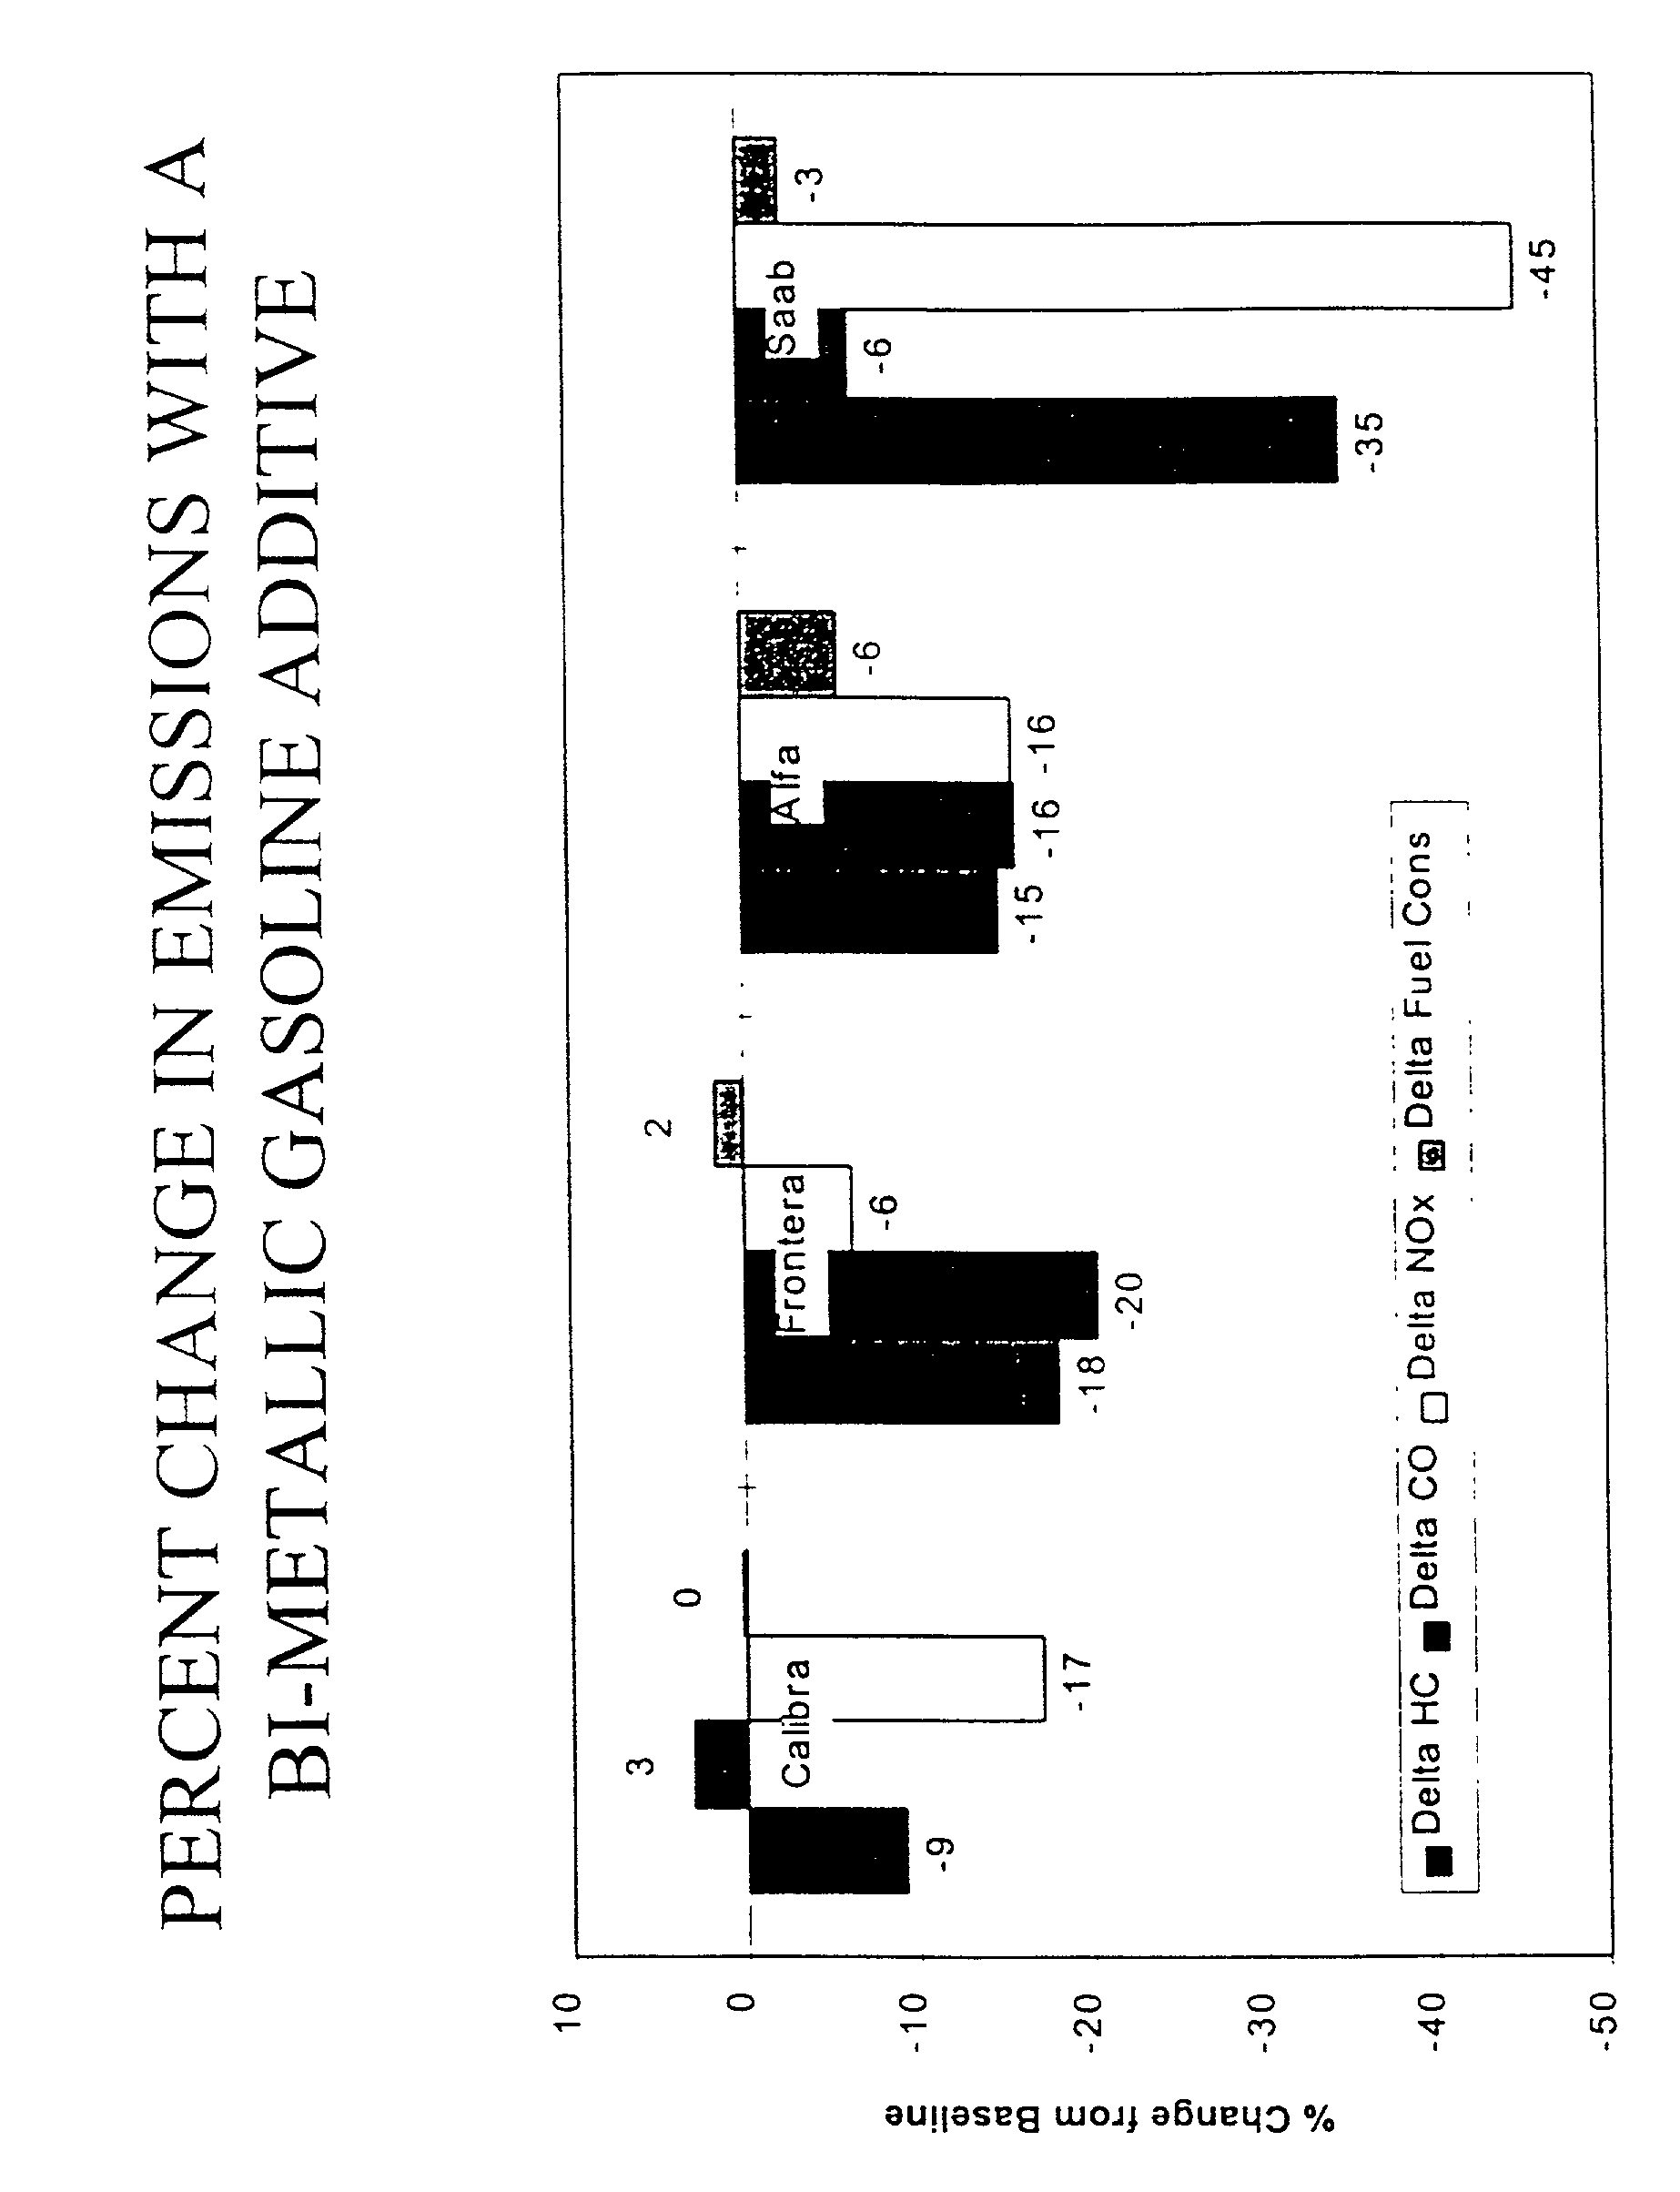 Method and composition for reducing emissions from a gasoline engine equipped with a three-way catalytic converter